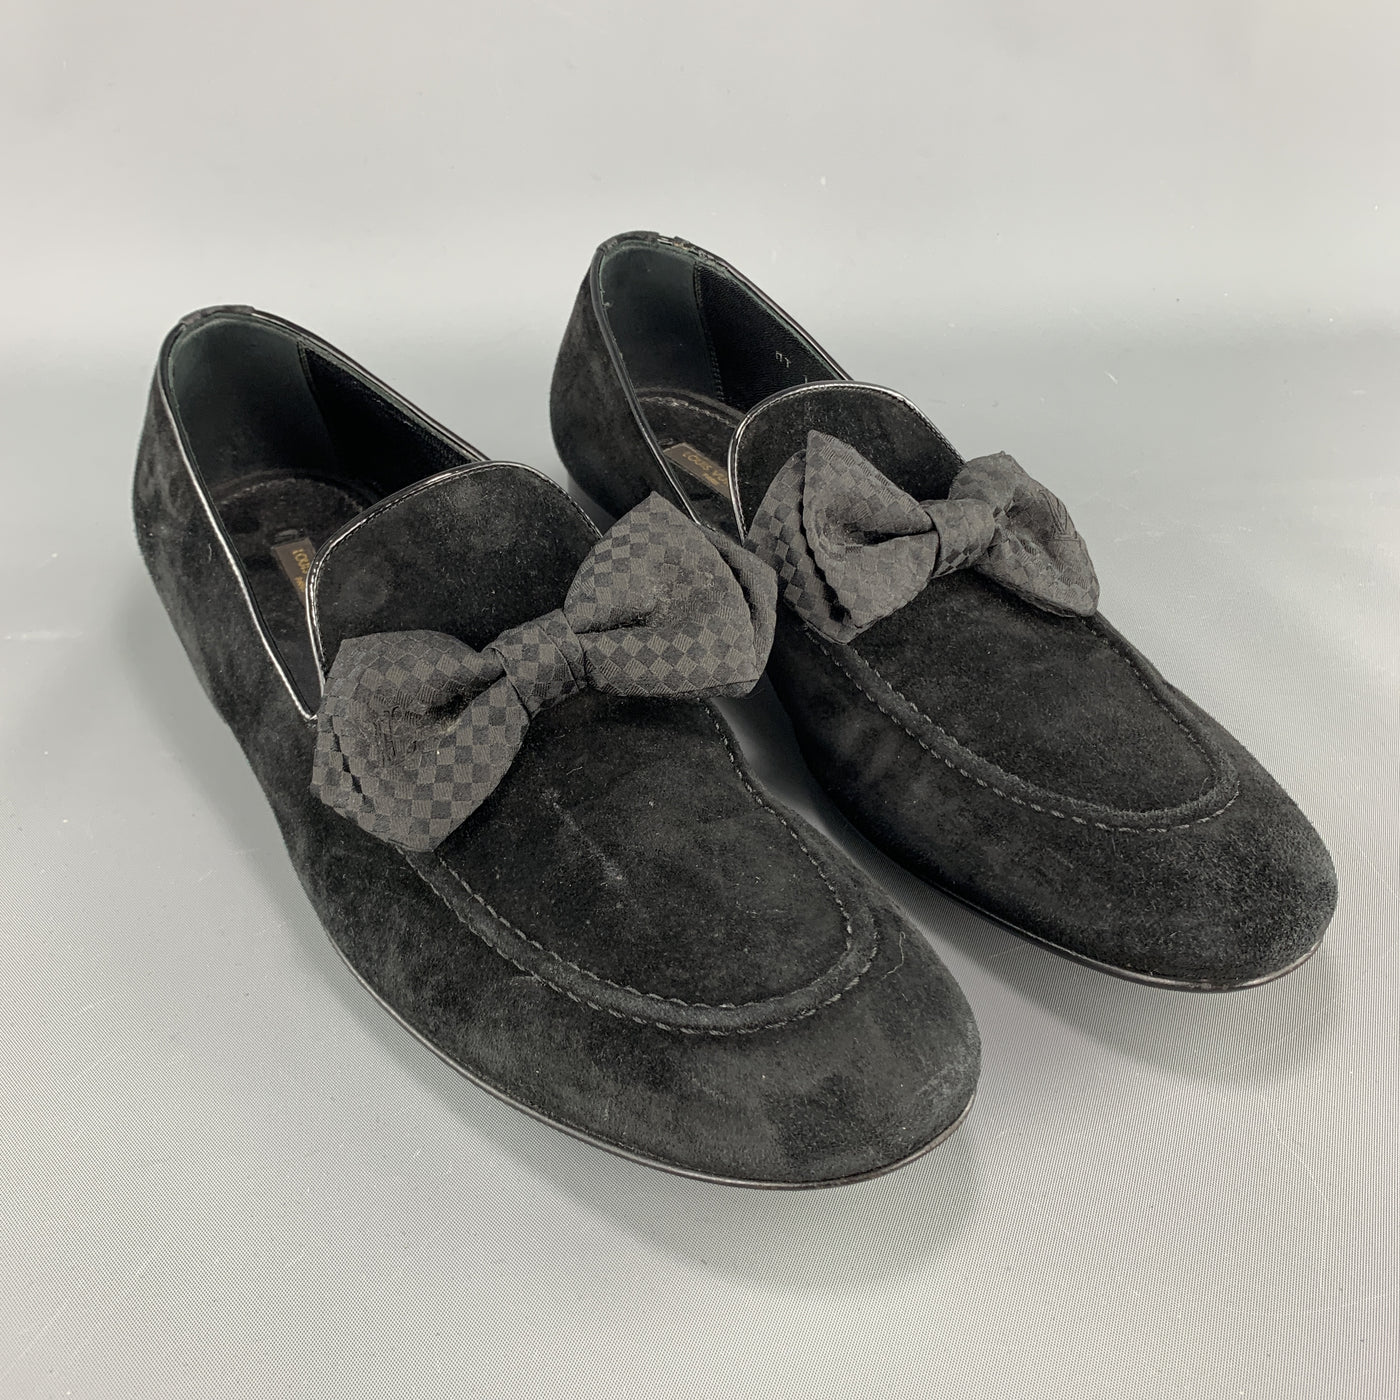 LOUIS VUITTON Size 9 Black Suede Slip On Bow Loafers